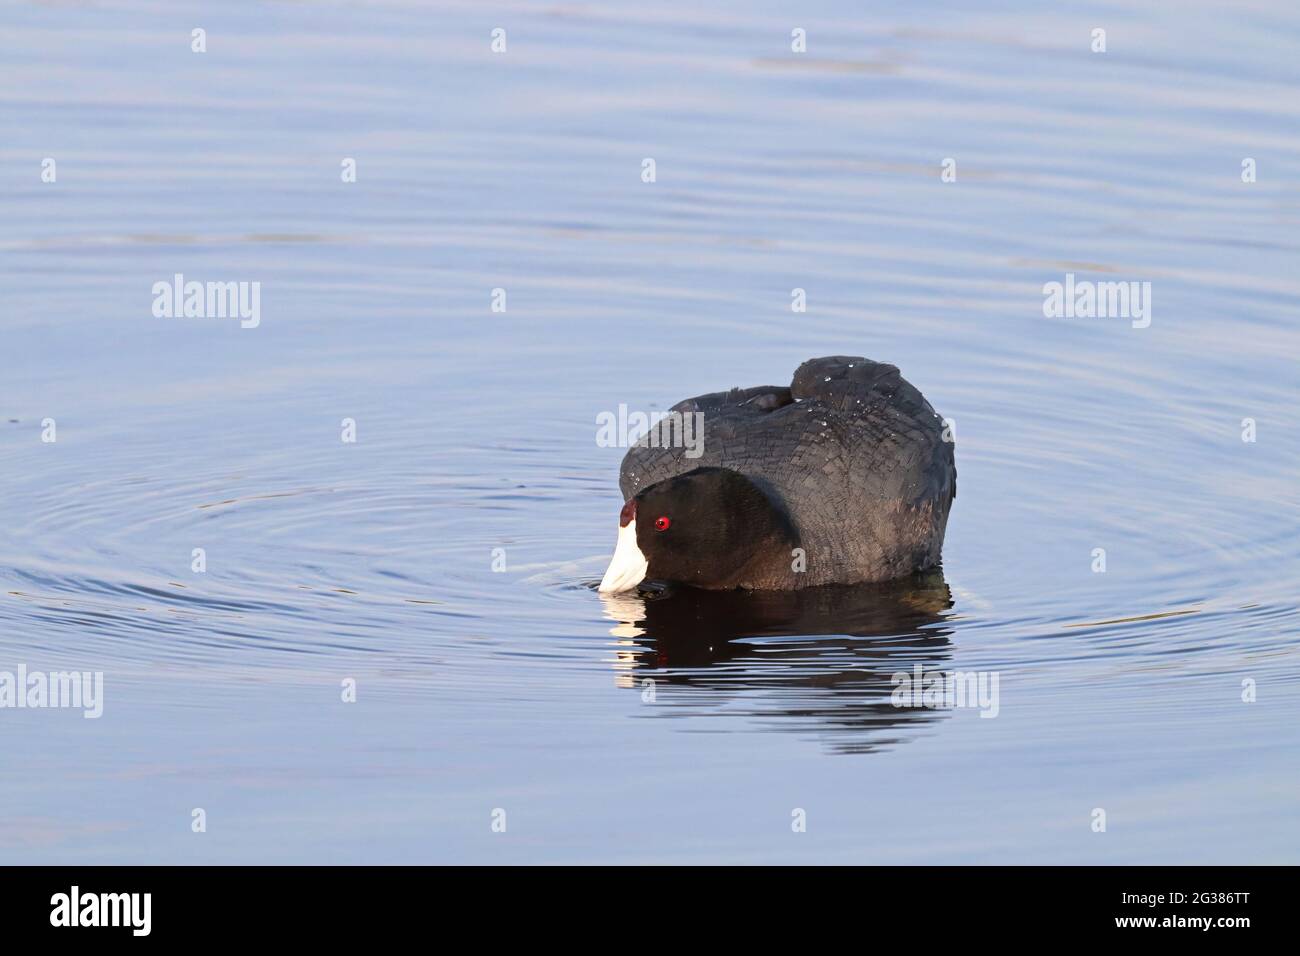 An American Coot duck swimming in water Stock Photo